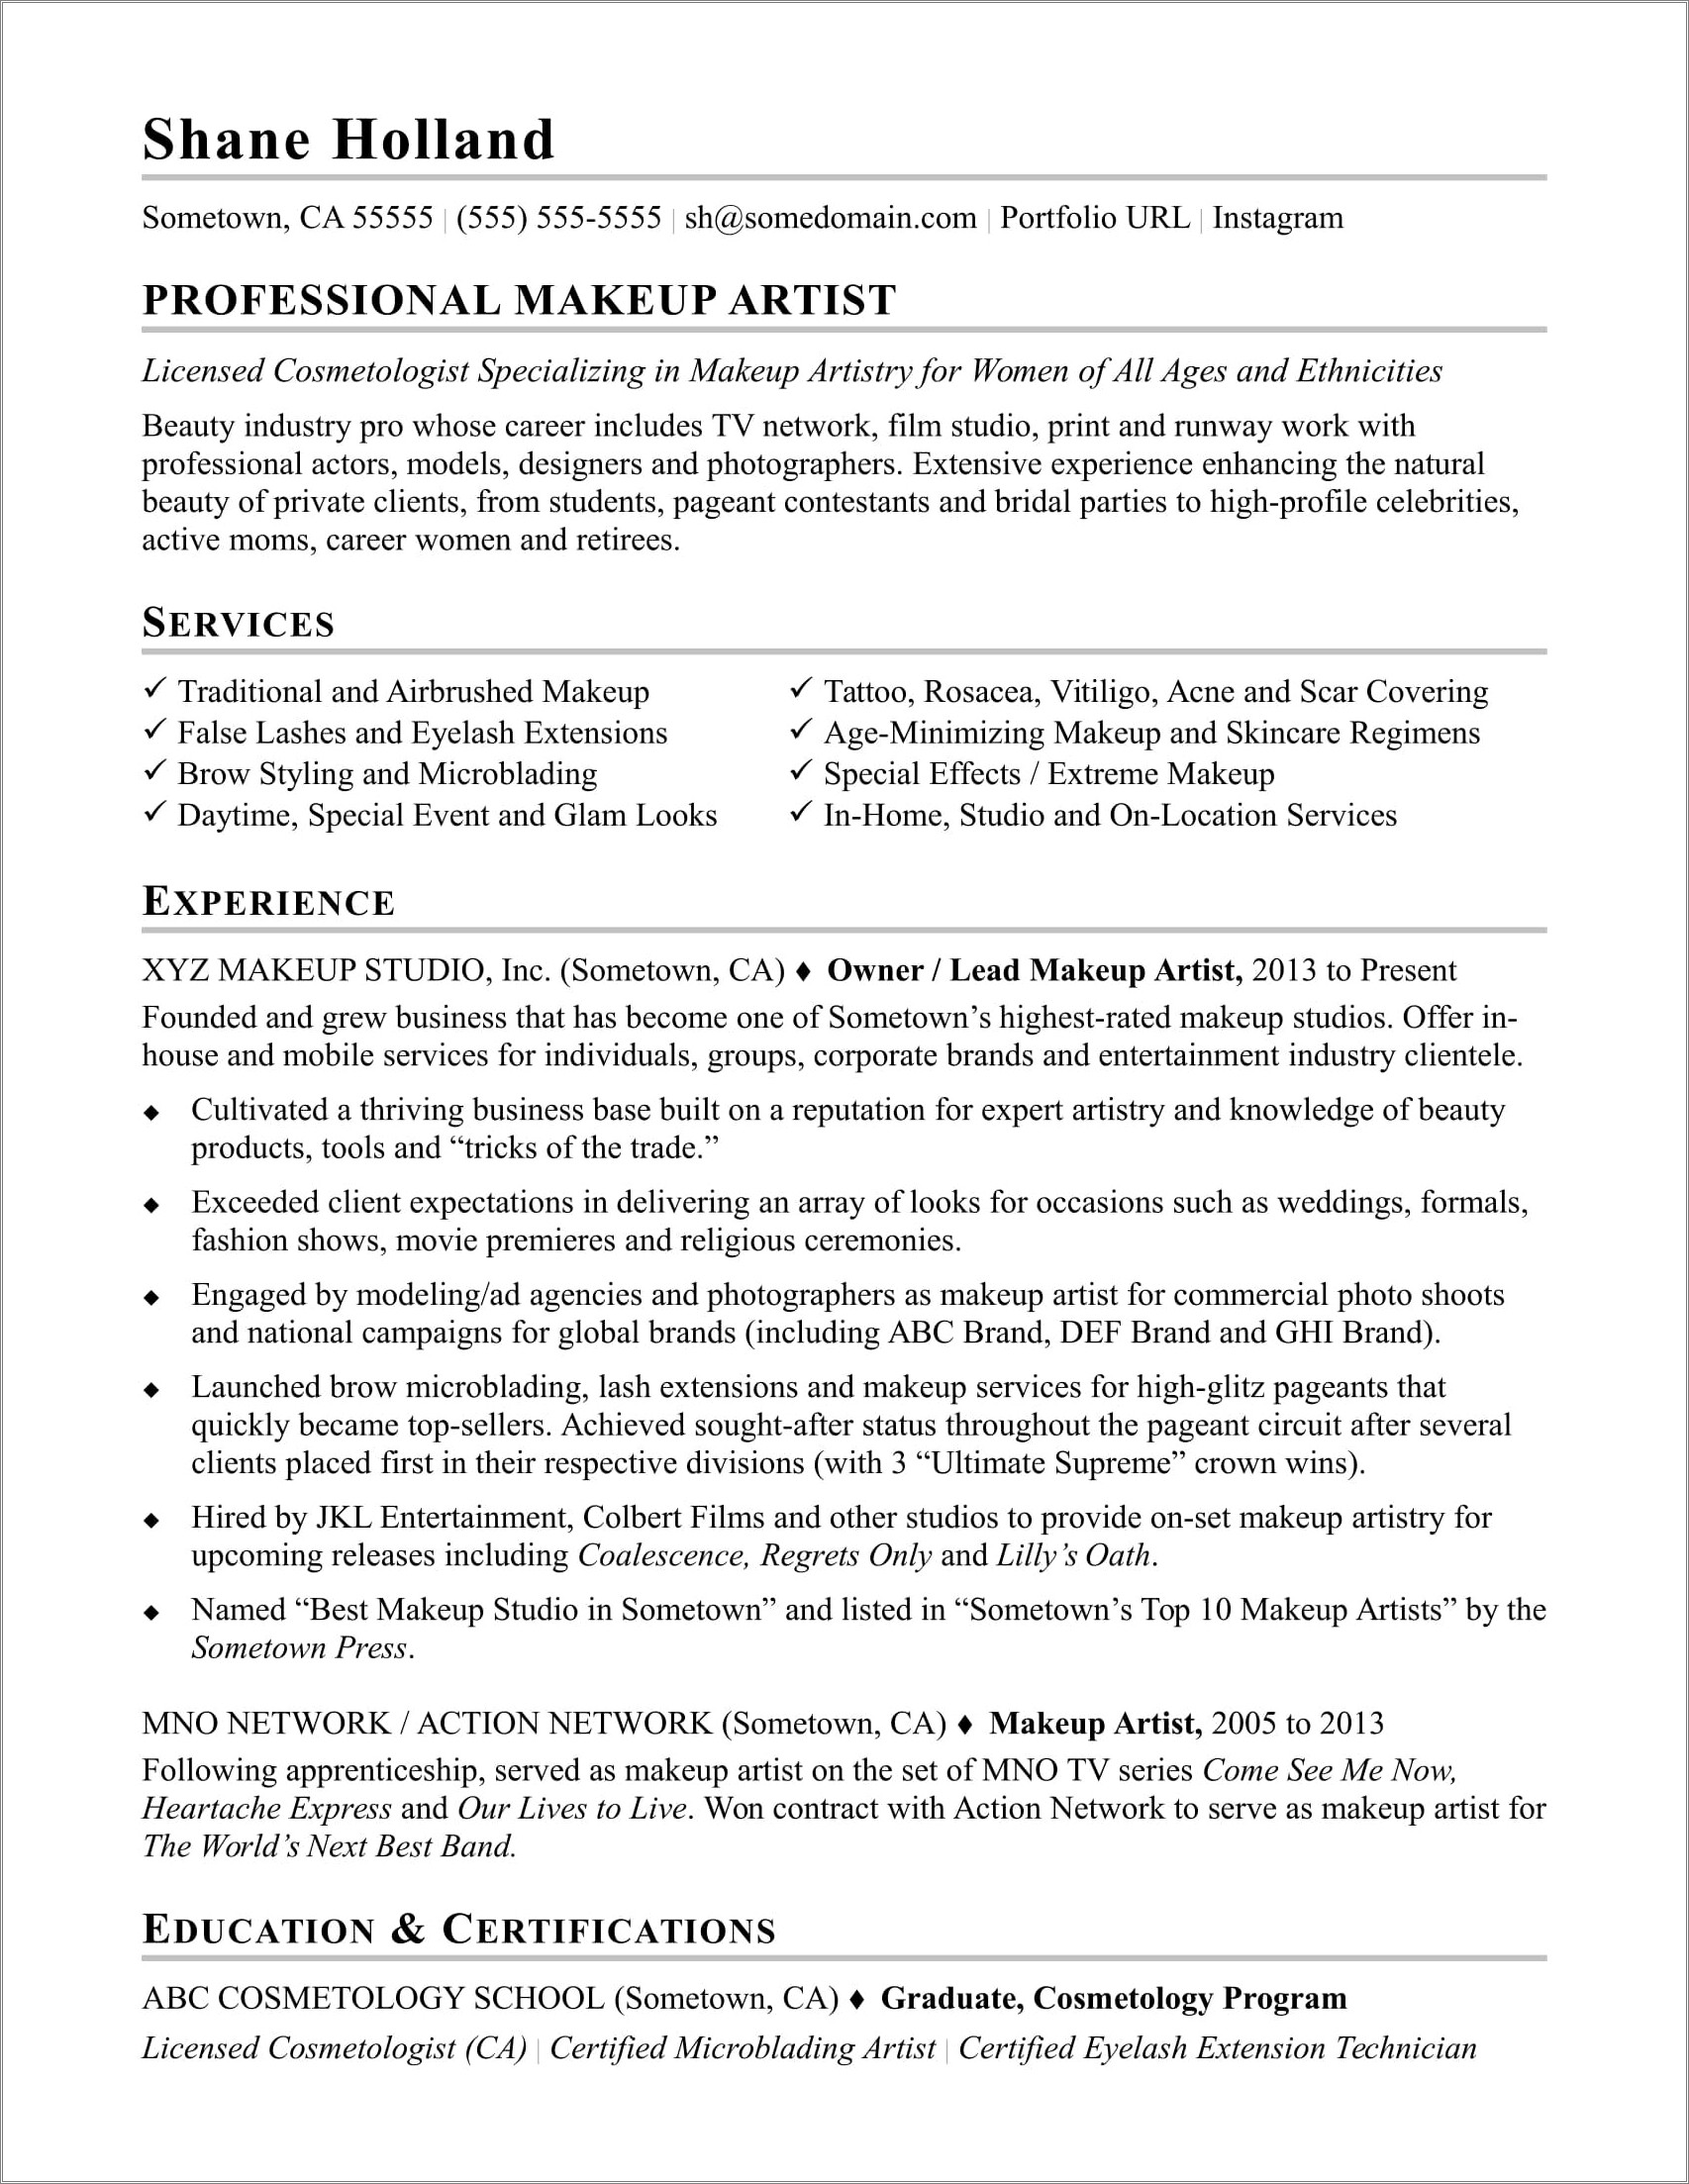 Sample Resume For Film And Entertainment Industry